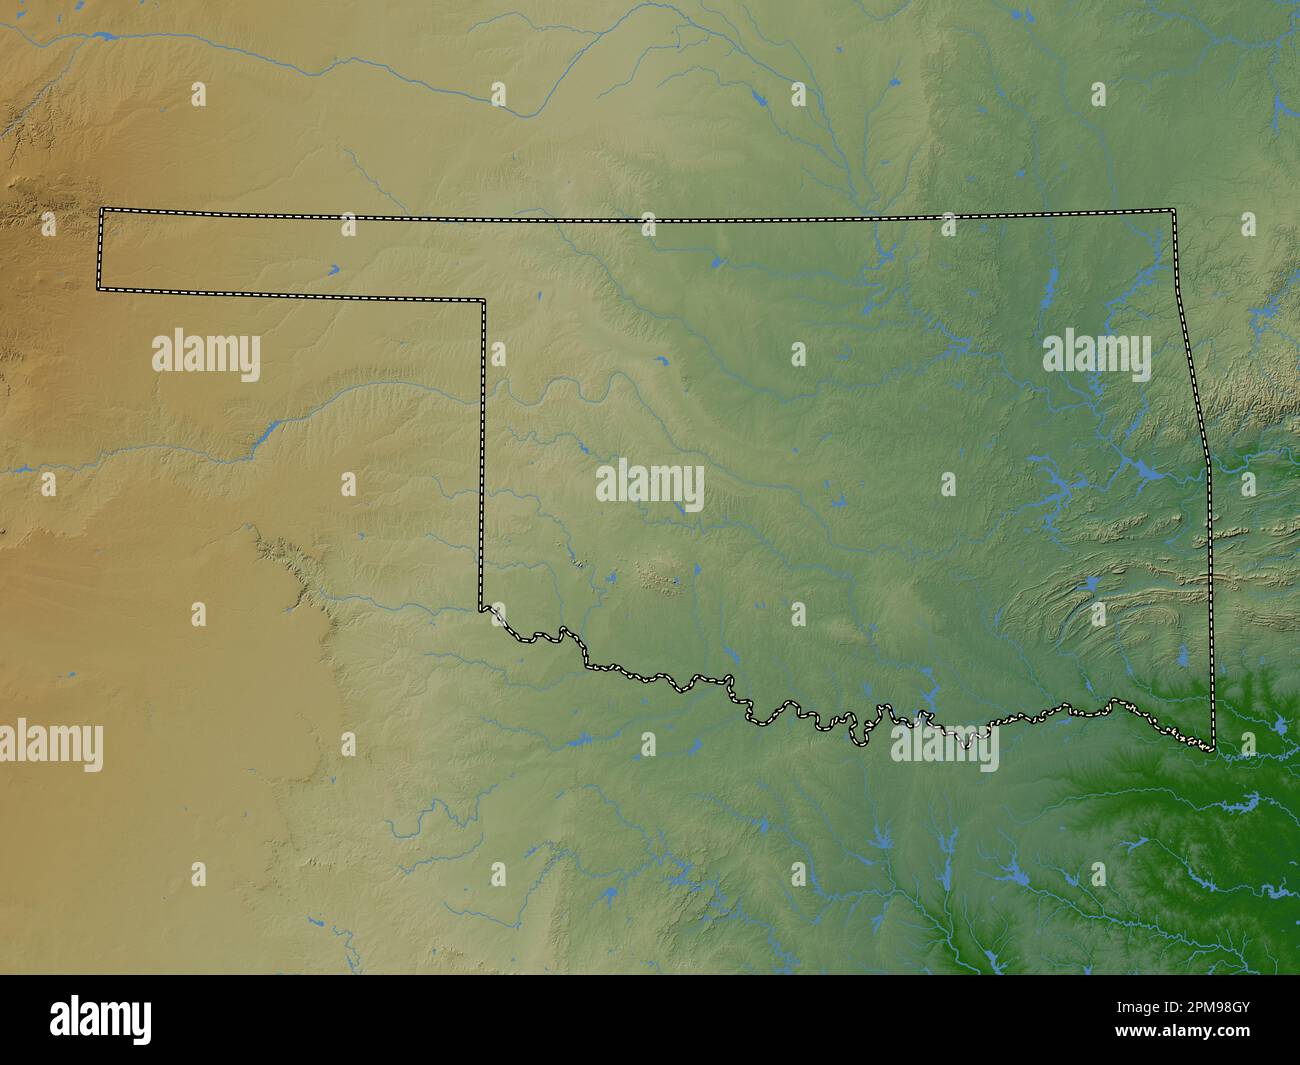 Oklahoma, state of United States of America. Colored elevation map with lakes and rivers Stock Photo